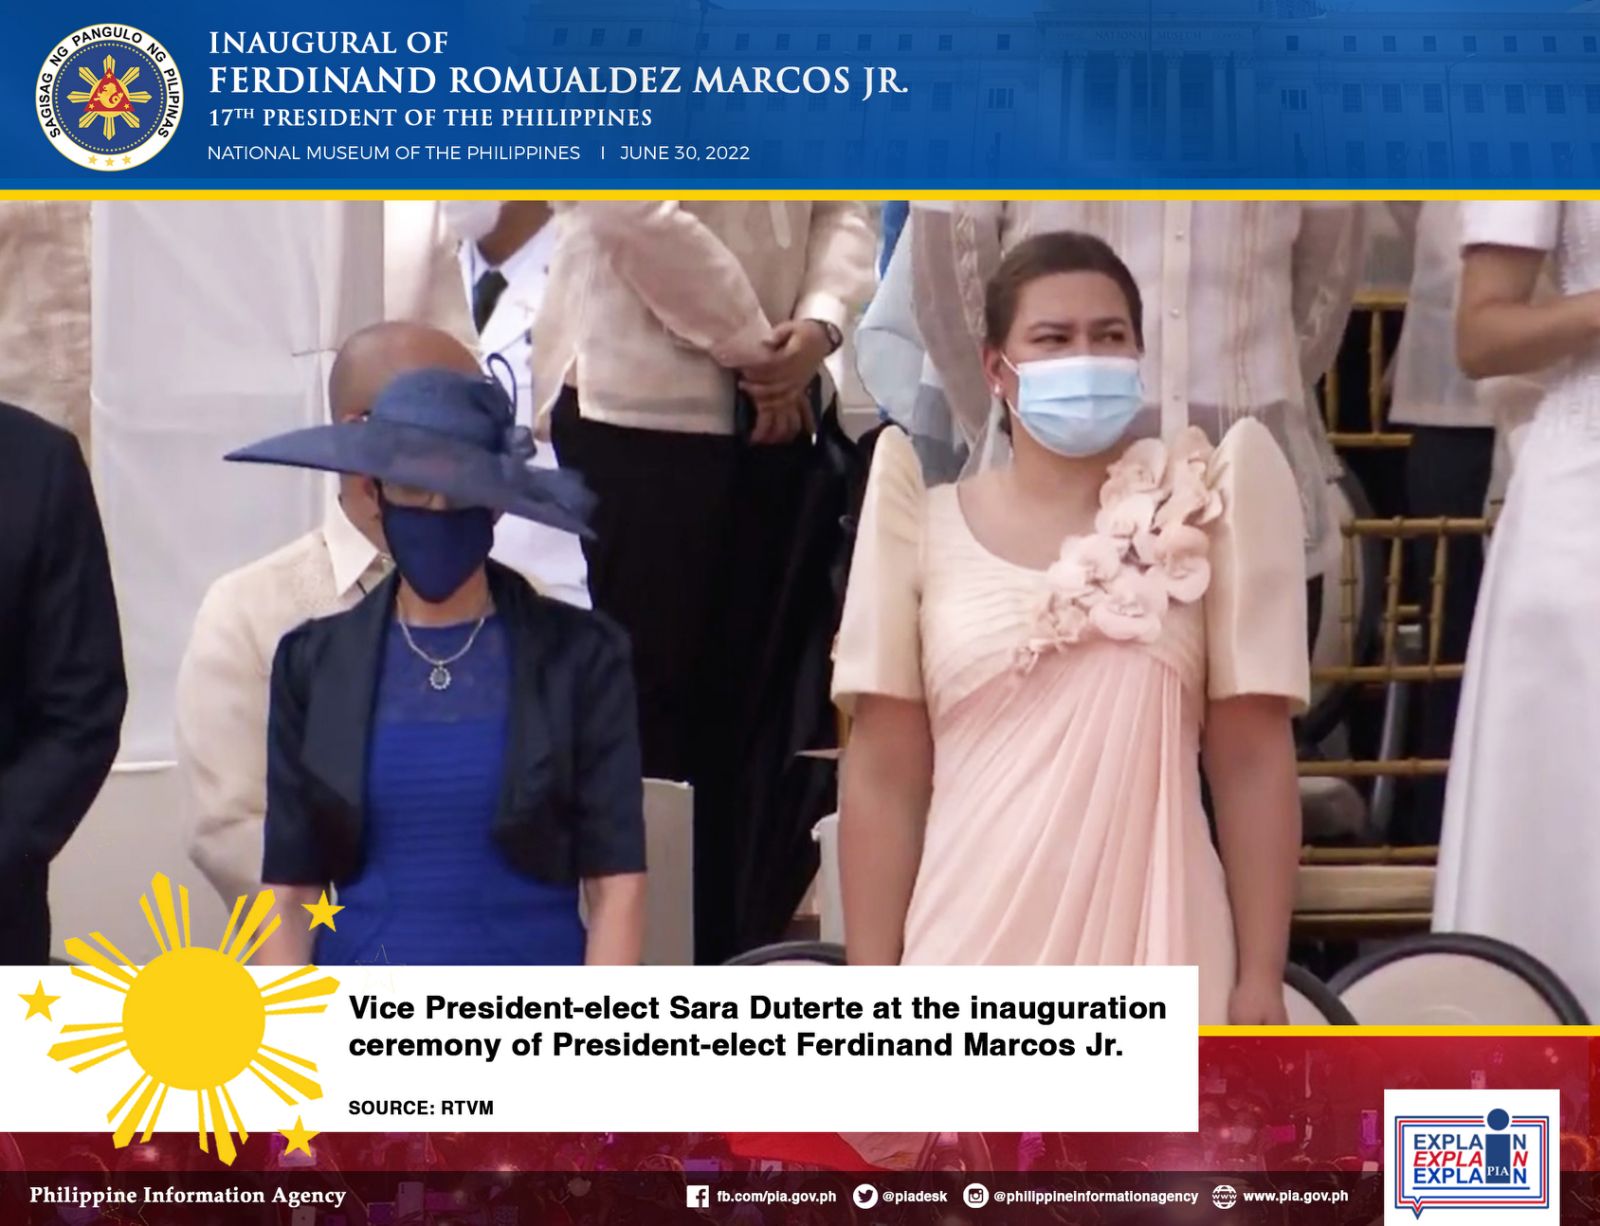 Vice President-elect Sara Duterte attends the inauguration ceremony of President-elect Ferdinand Marcos Jr.